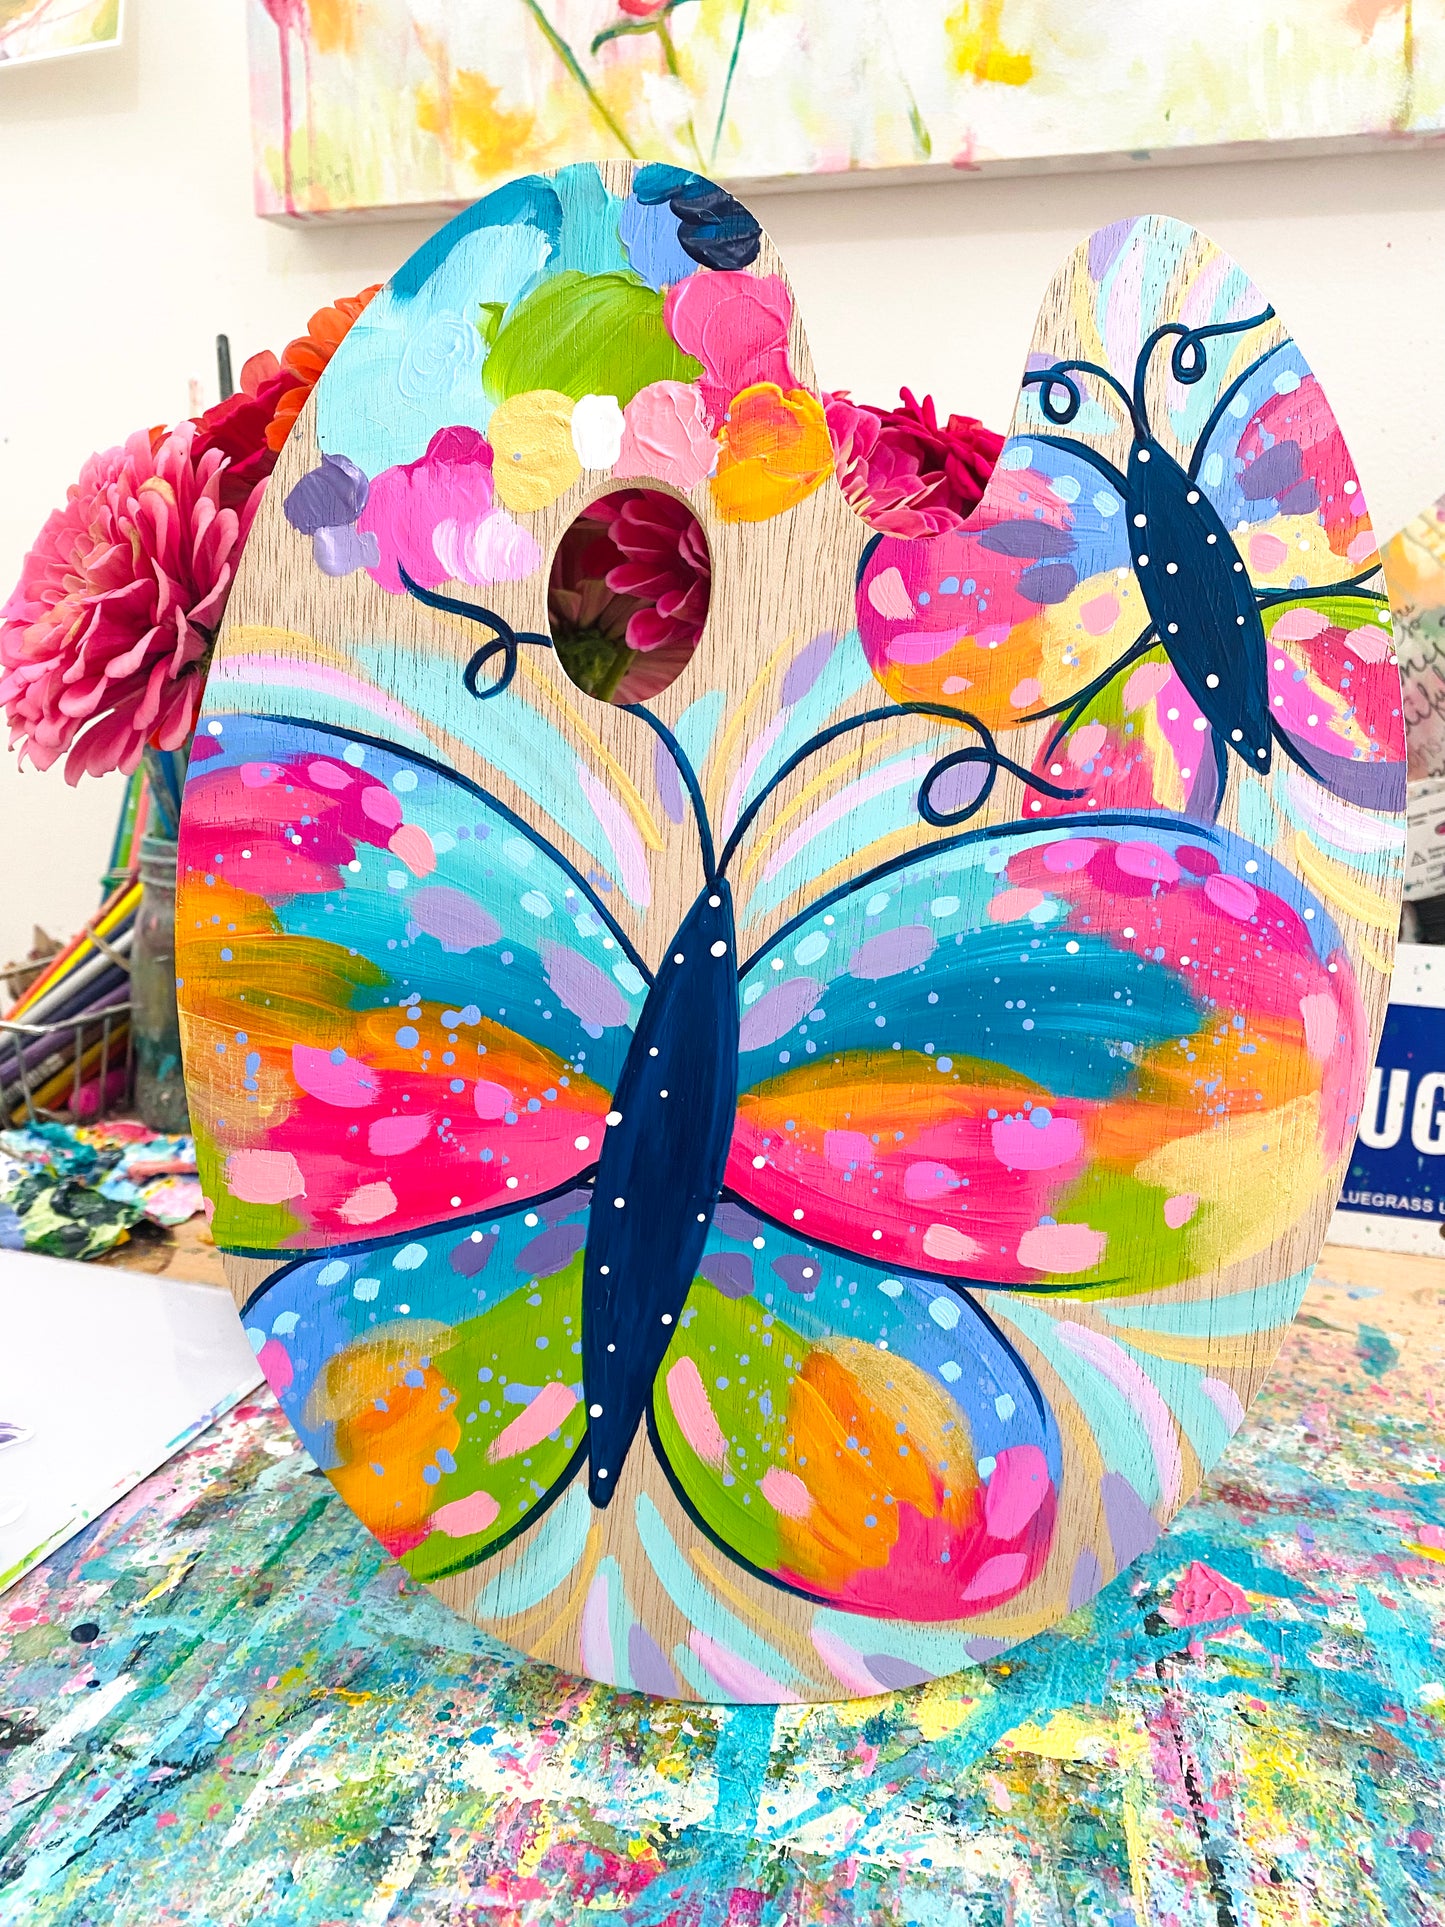 August 2022 Daily Paint Palette Painting Day 18 - Colorful Butterflies